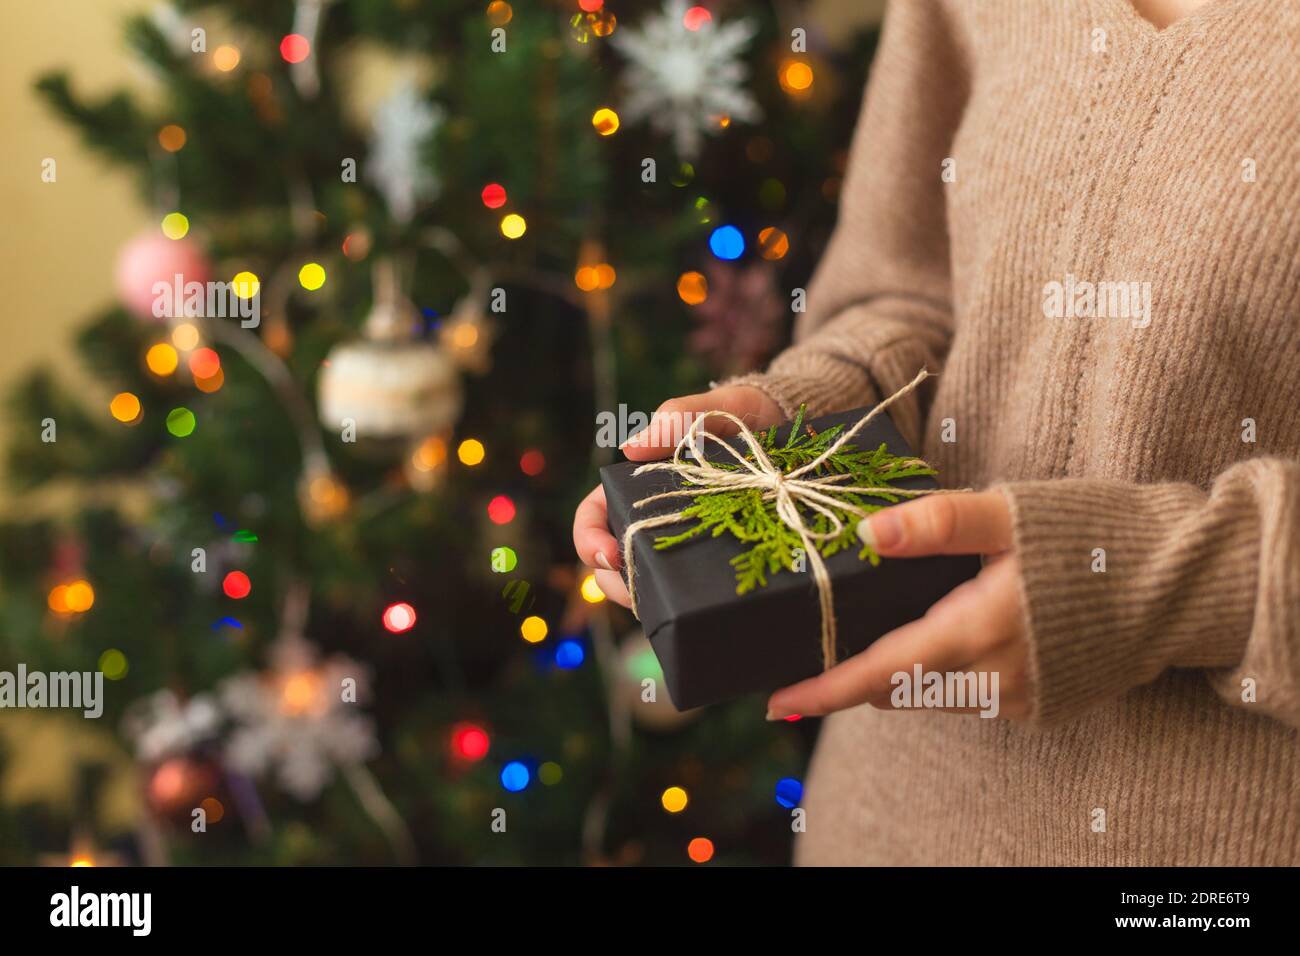 Womans hands holding nice present wrapped in black paper and decorated with green branch, Christmas tree on background Stock Photo